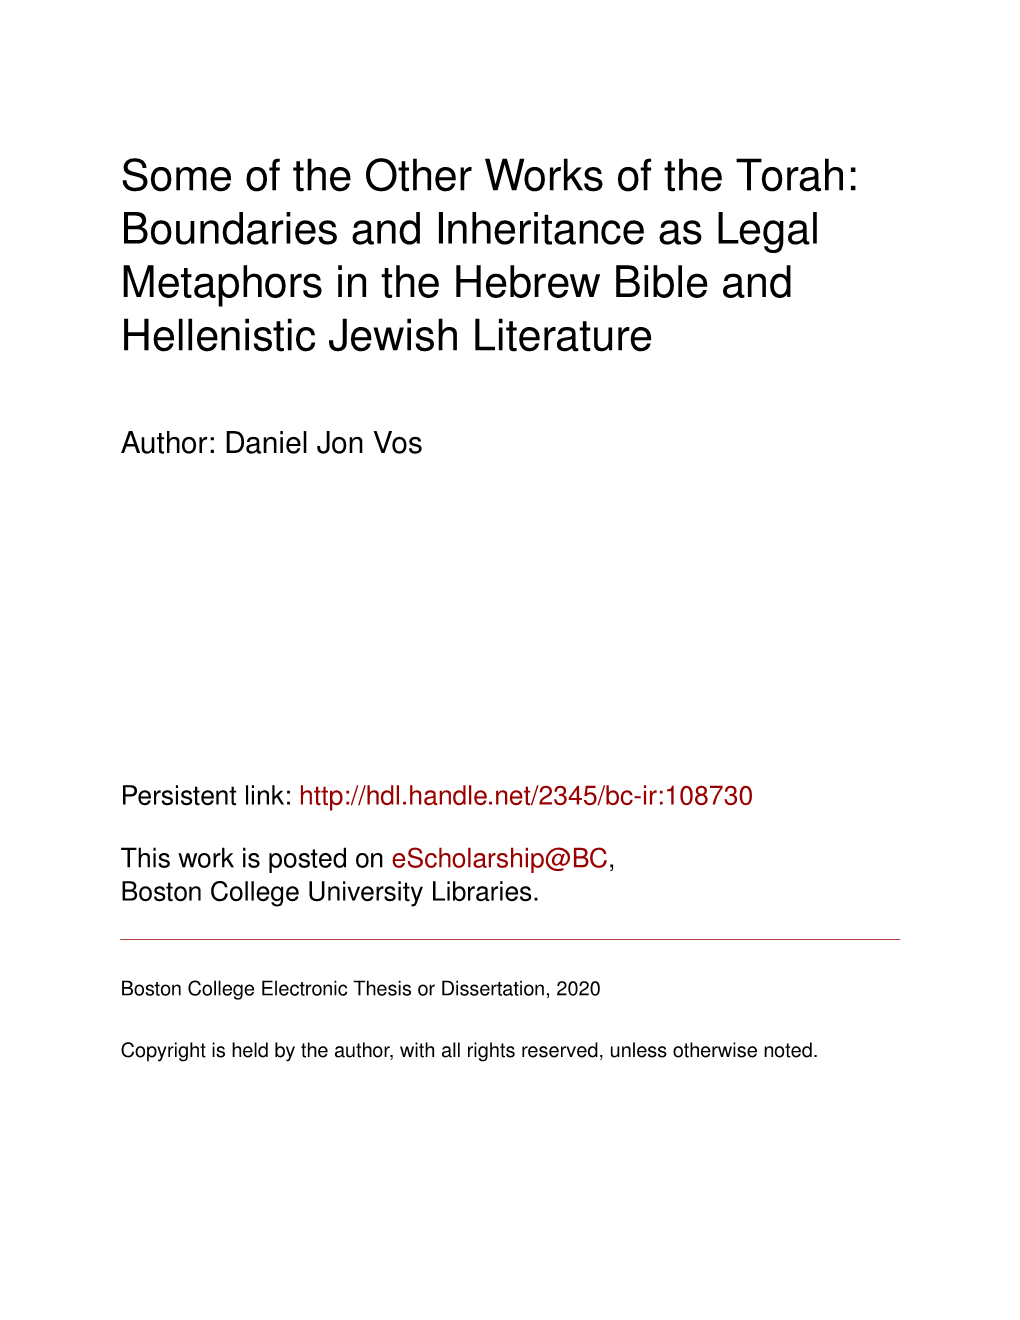 Boundaries and Inheritance As Legal Metaphors in the Hebrew Bible and Hellenistic Jewish Literature